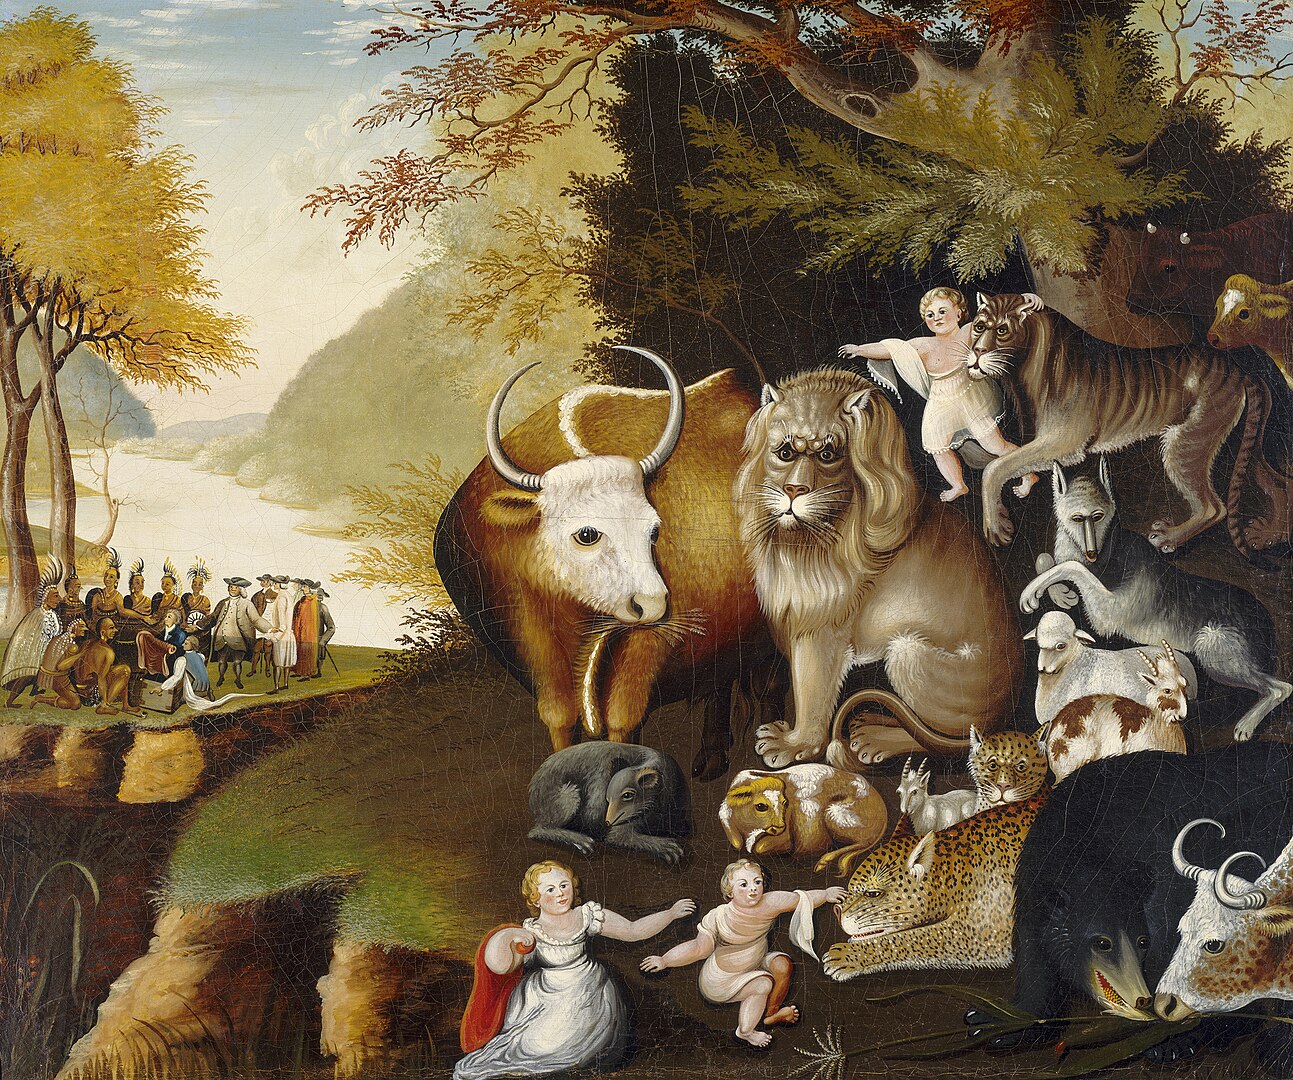 A collection of mammals and humans of a variety of ages congregate together on a hillside.